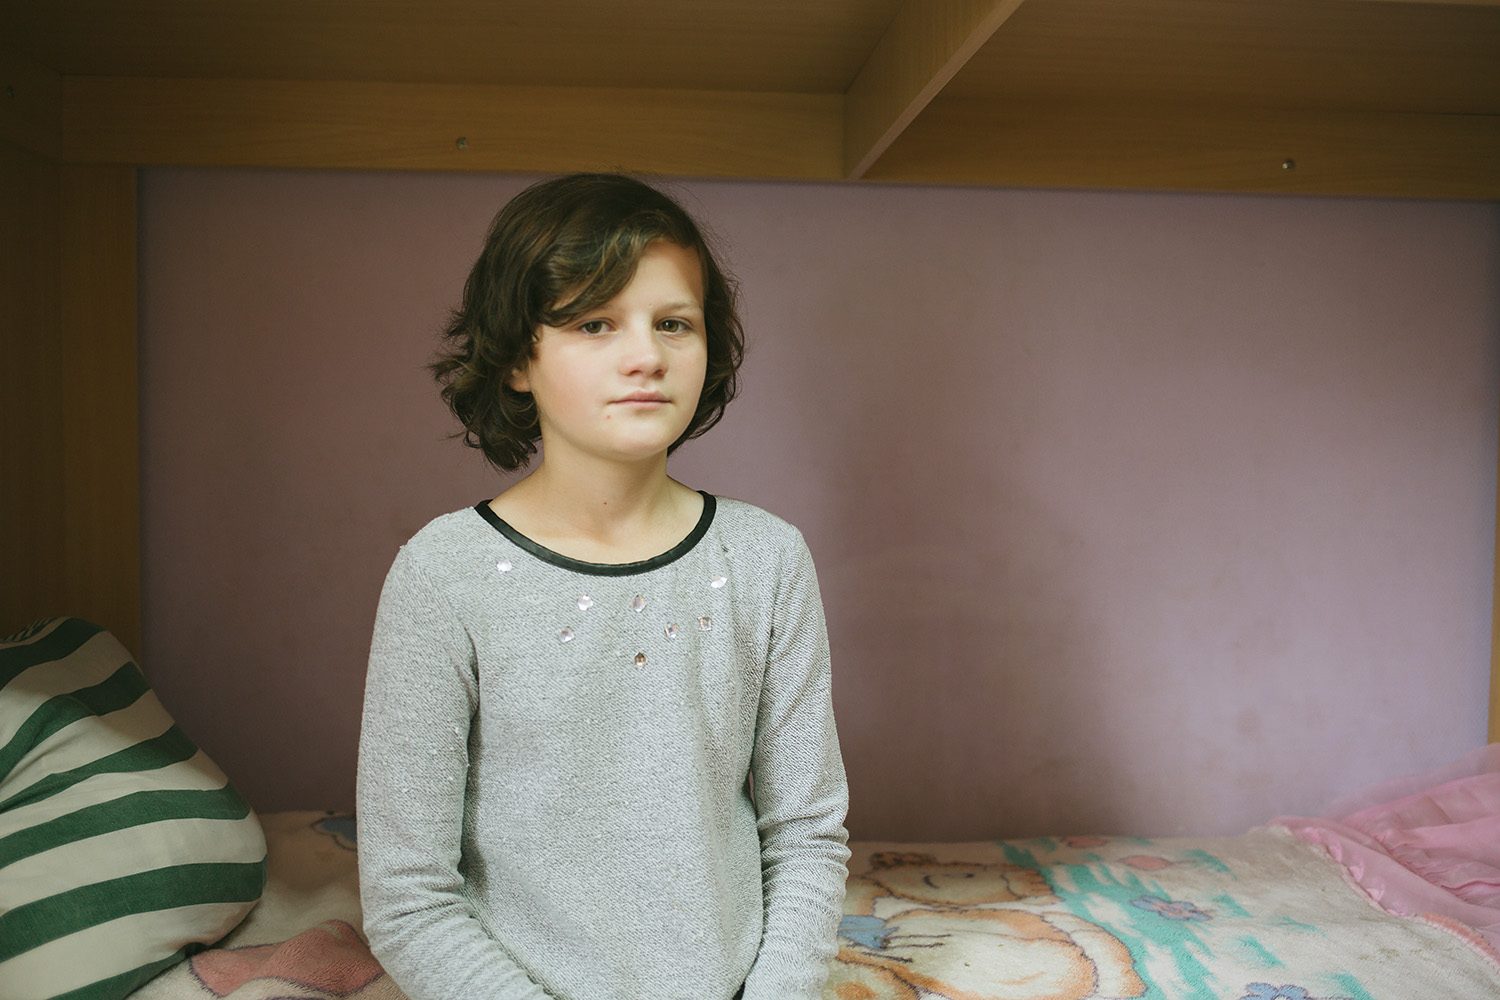 At just 11 years old, Inga has had a very difficult childhood